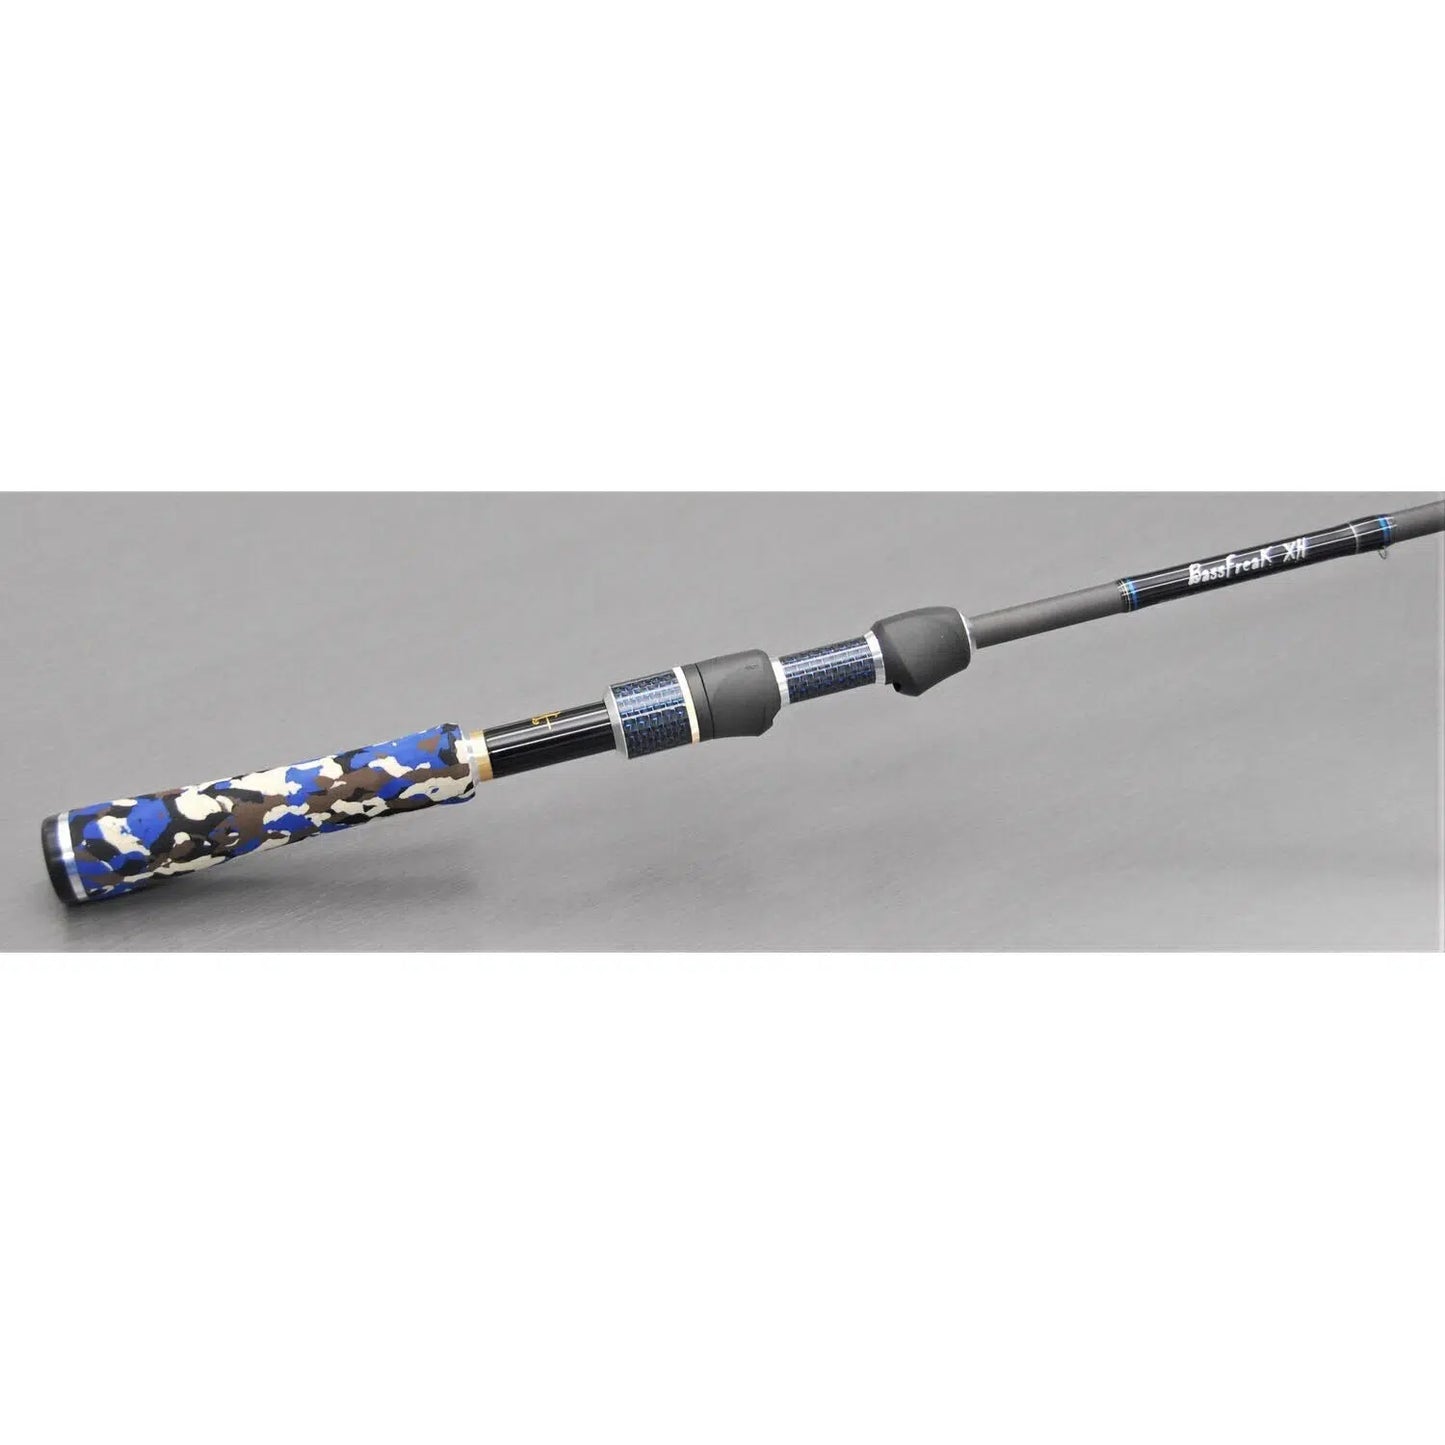 Millerods Production Rod-Rod-Millerods-Spin-Bassfreak XH 601-Fishing Station